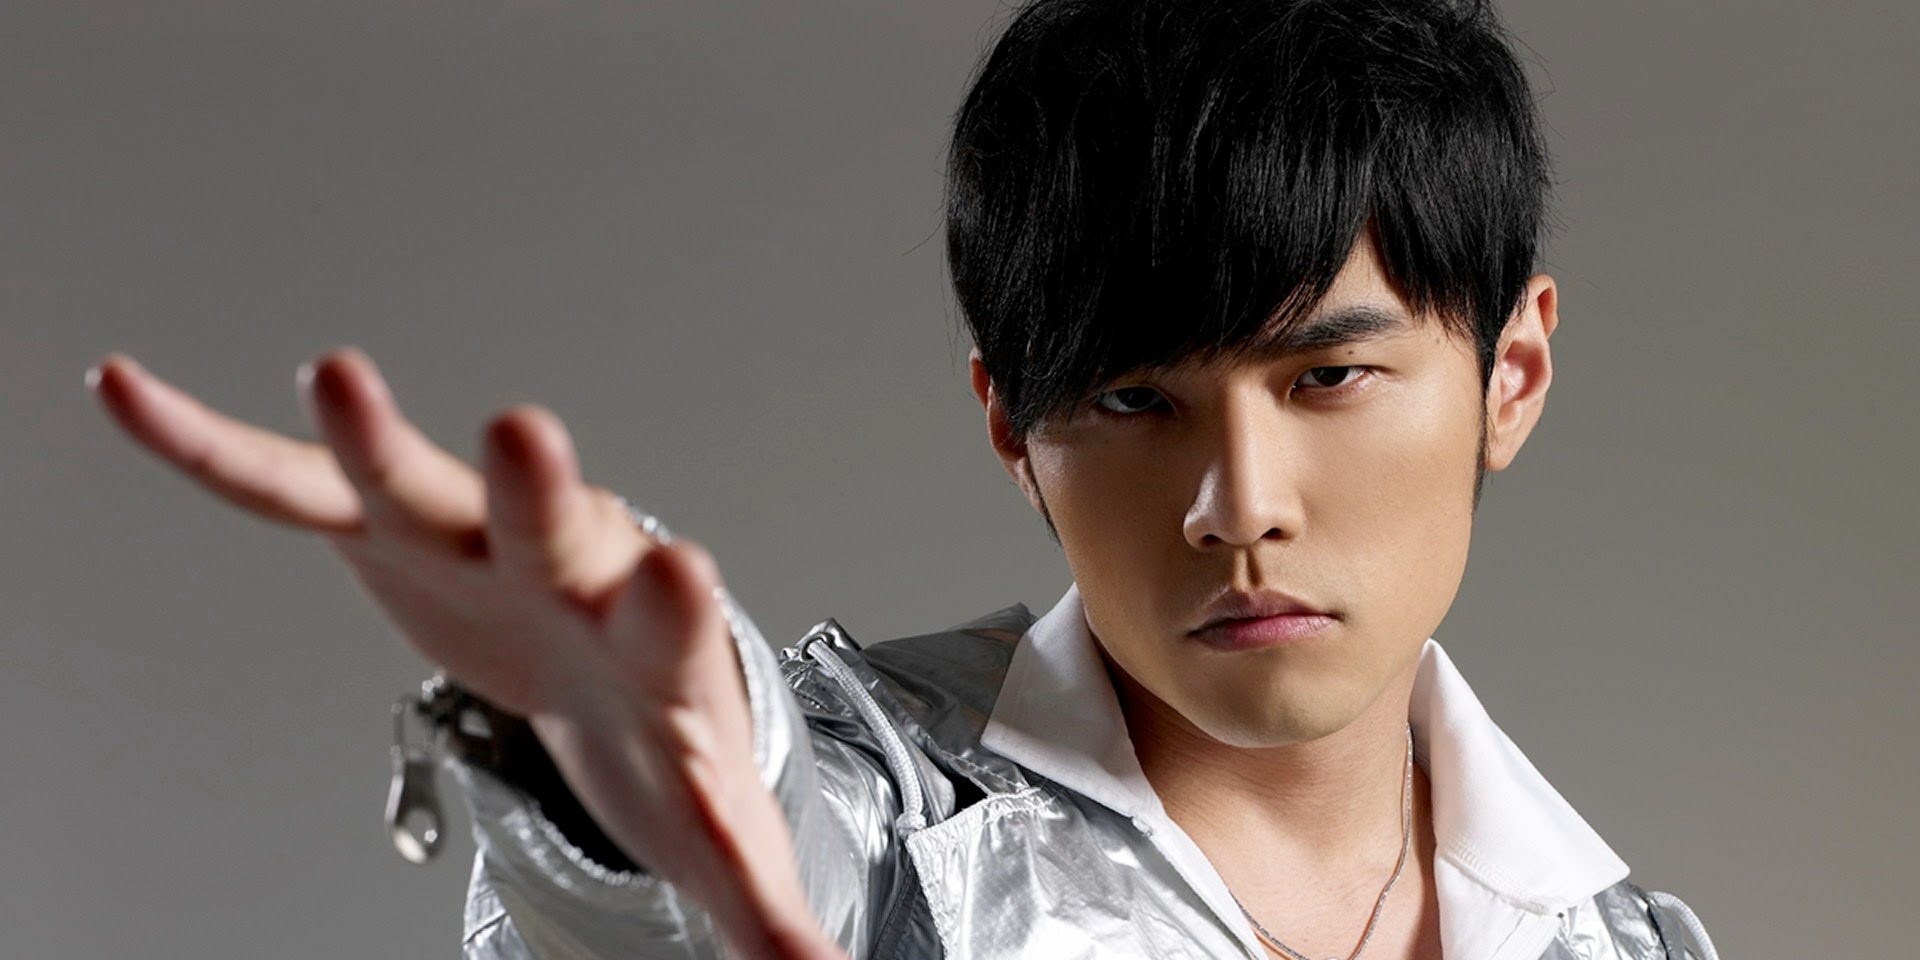 There's a petition demanding refunds after Jay Chou's recent show in Singapore